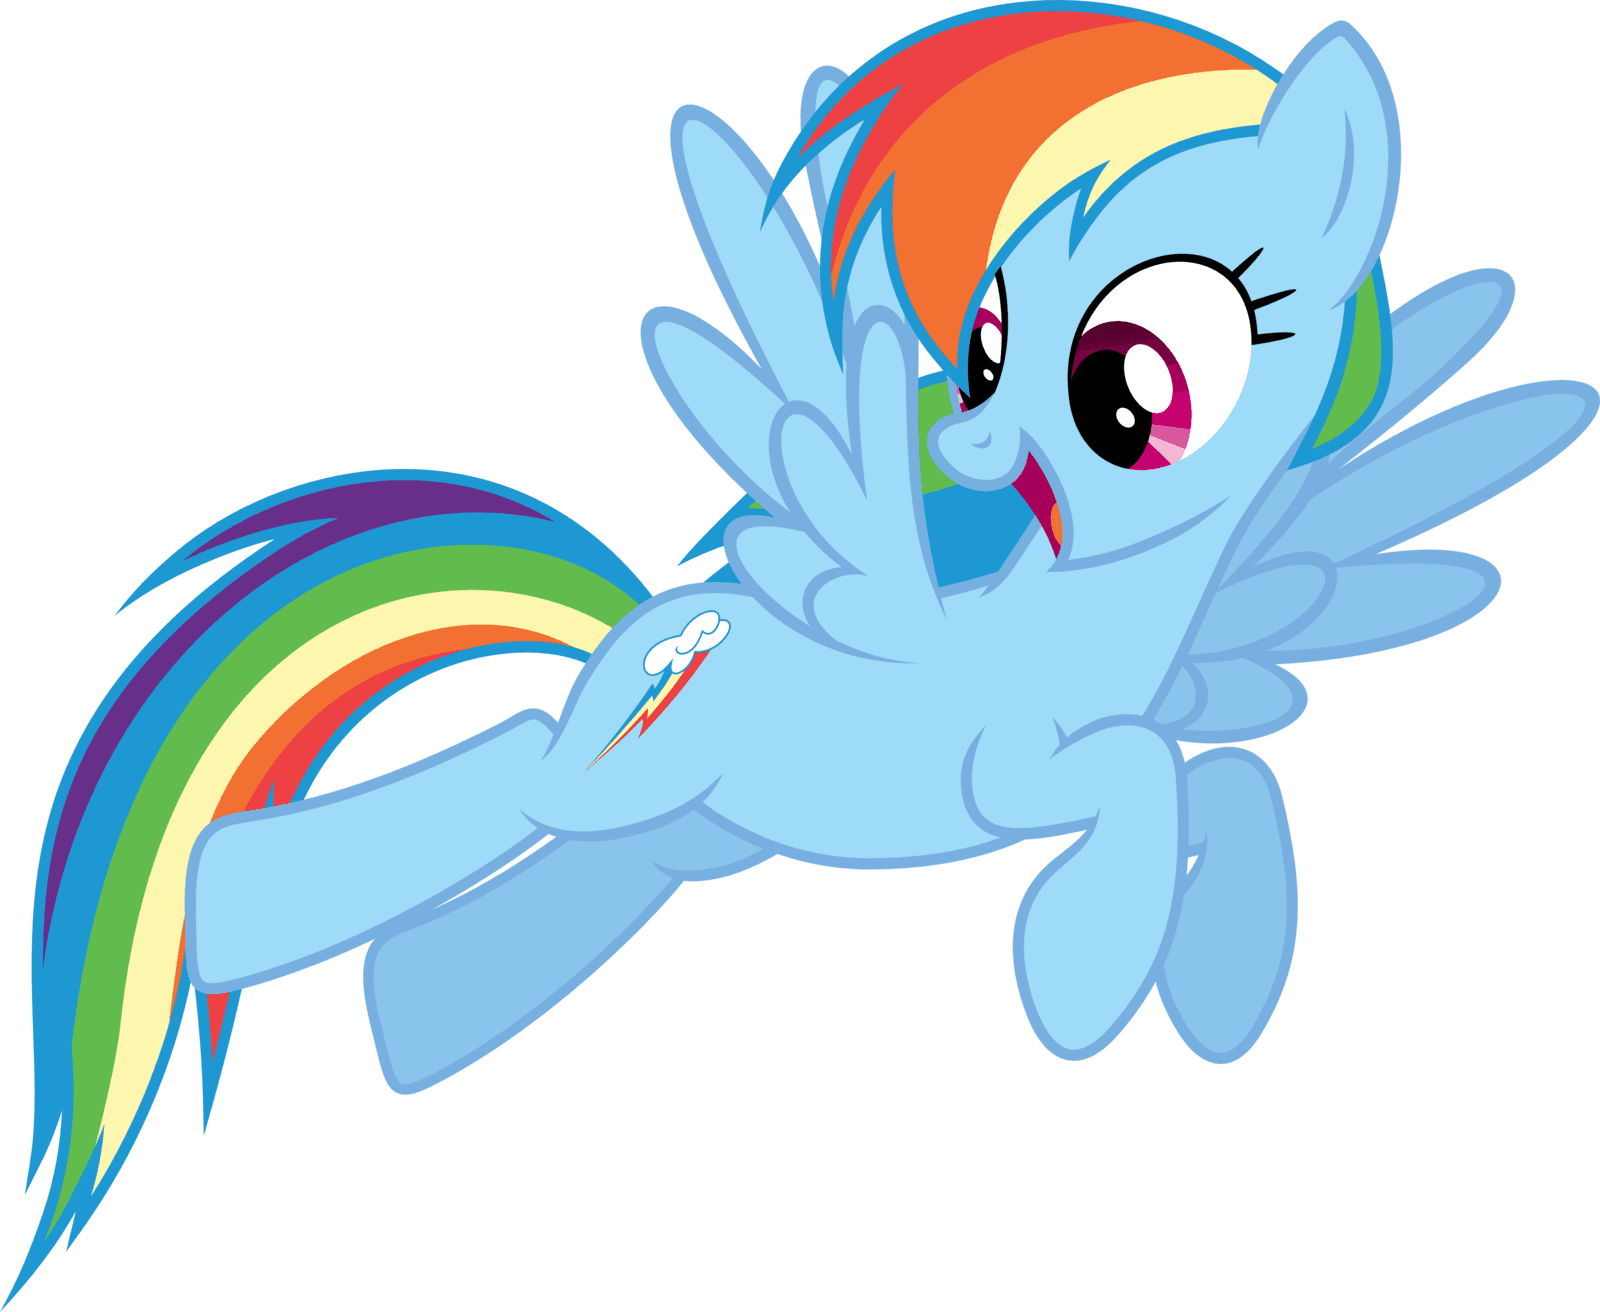 FANMADE Rainbow dash by timei